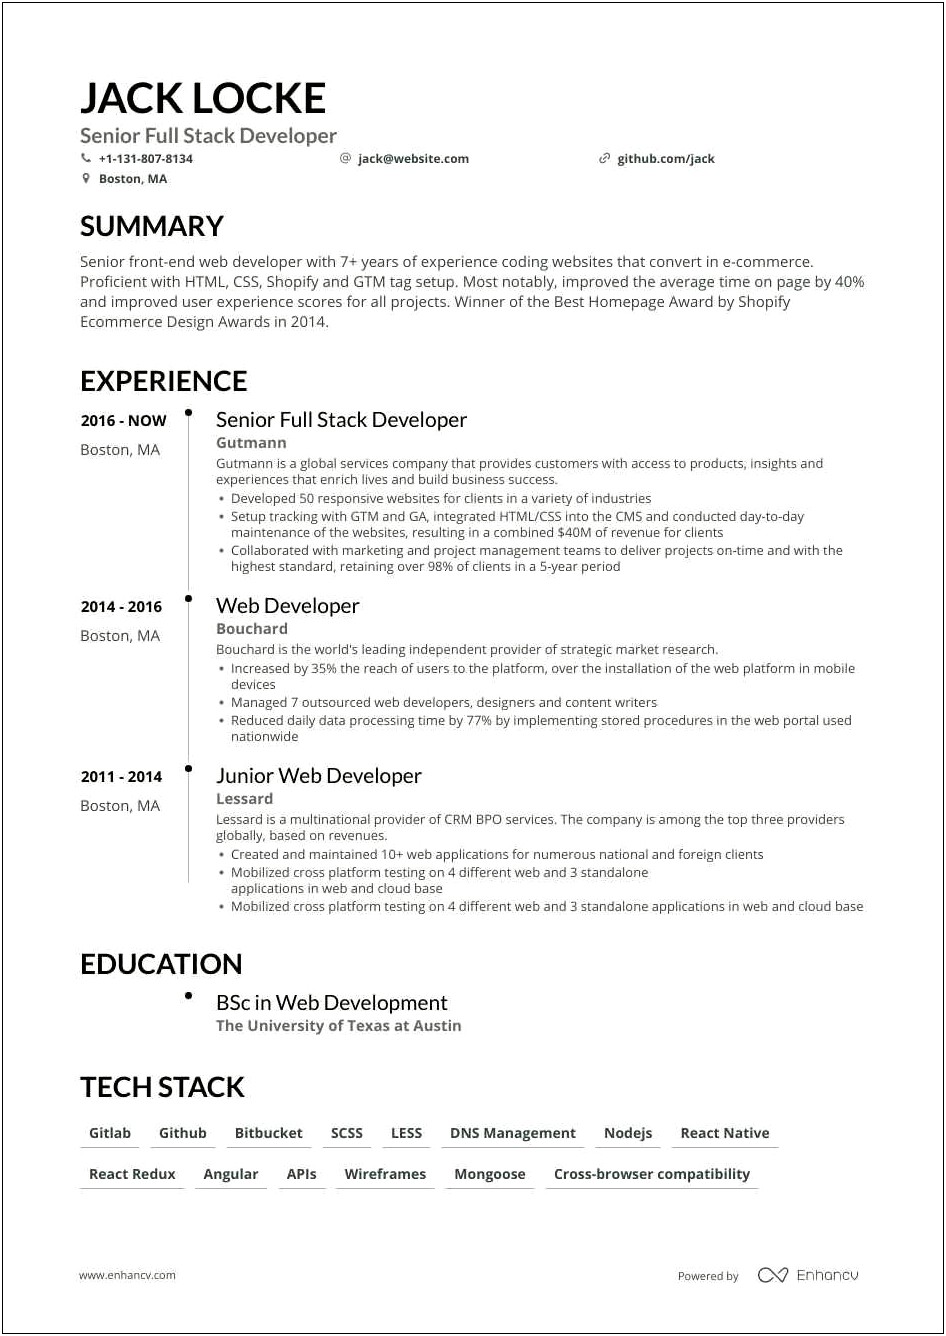 Resume Who Worked For Web Developer